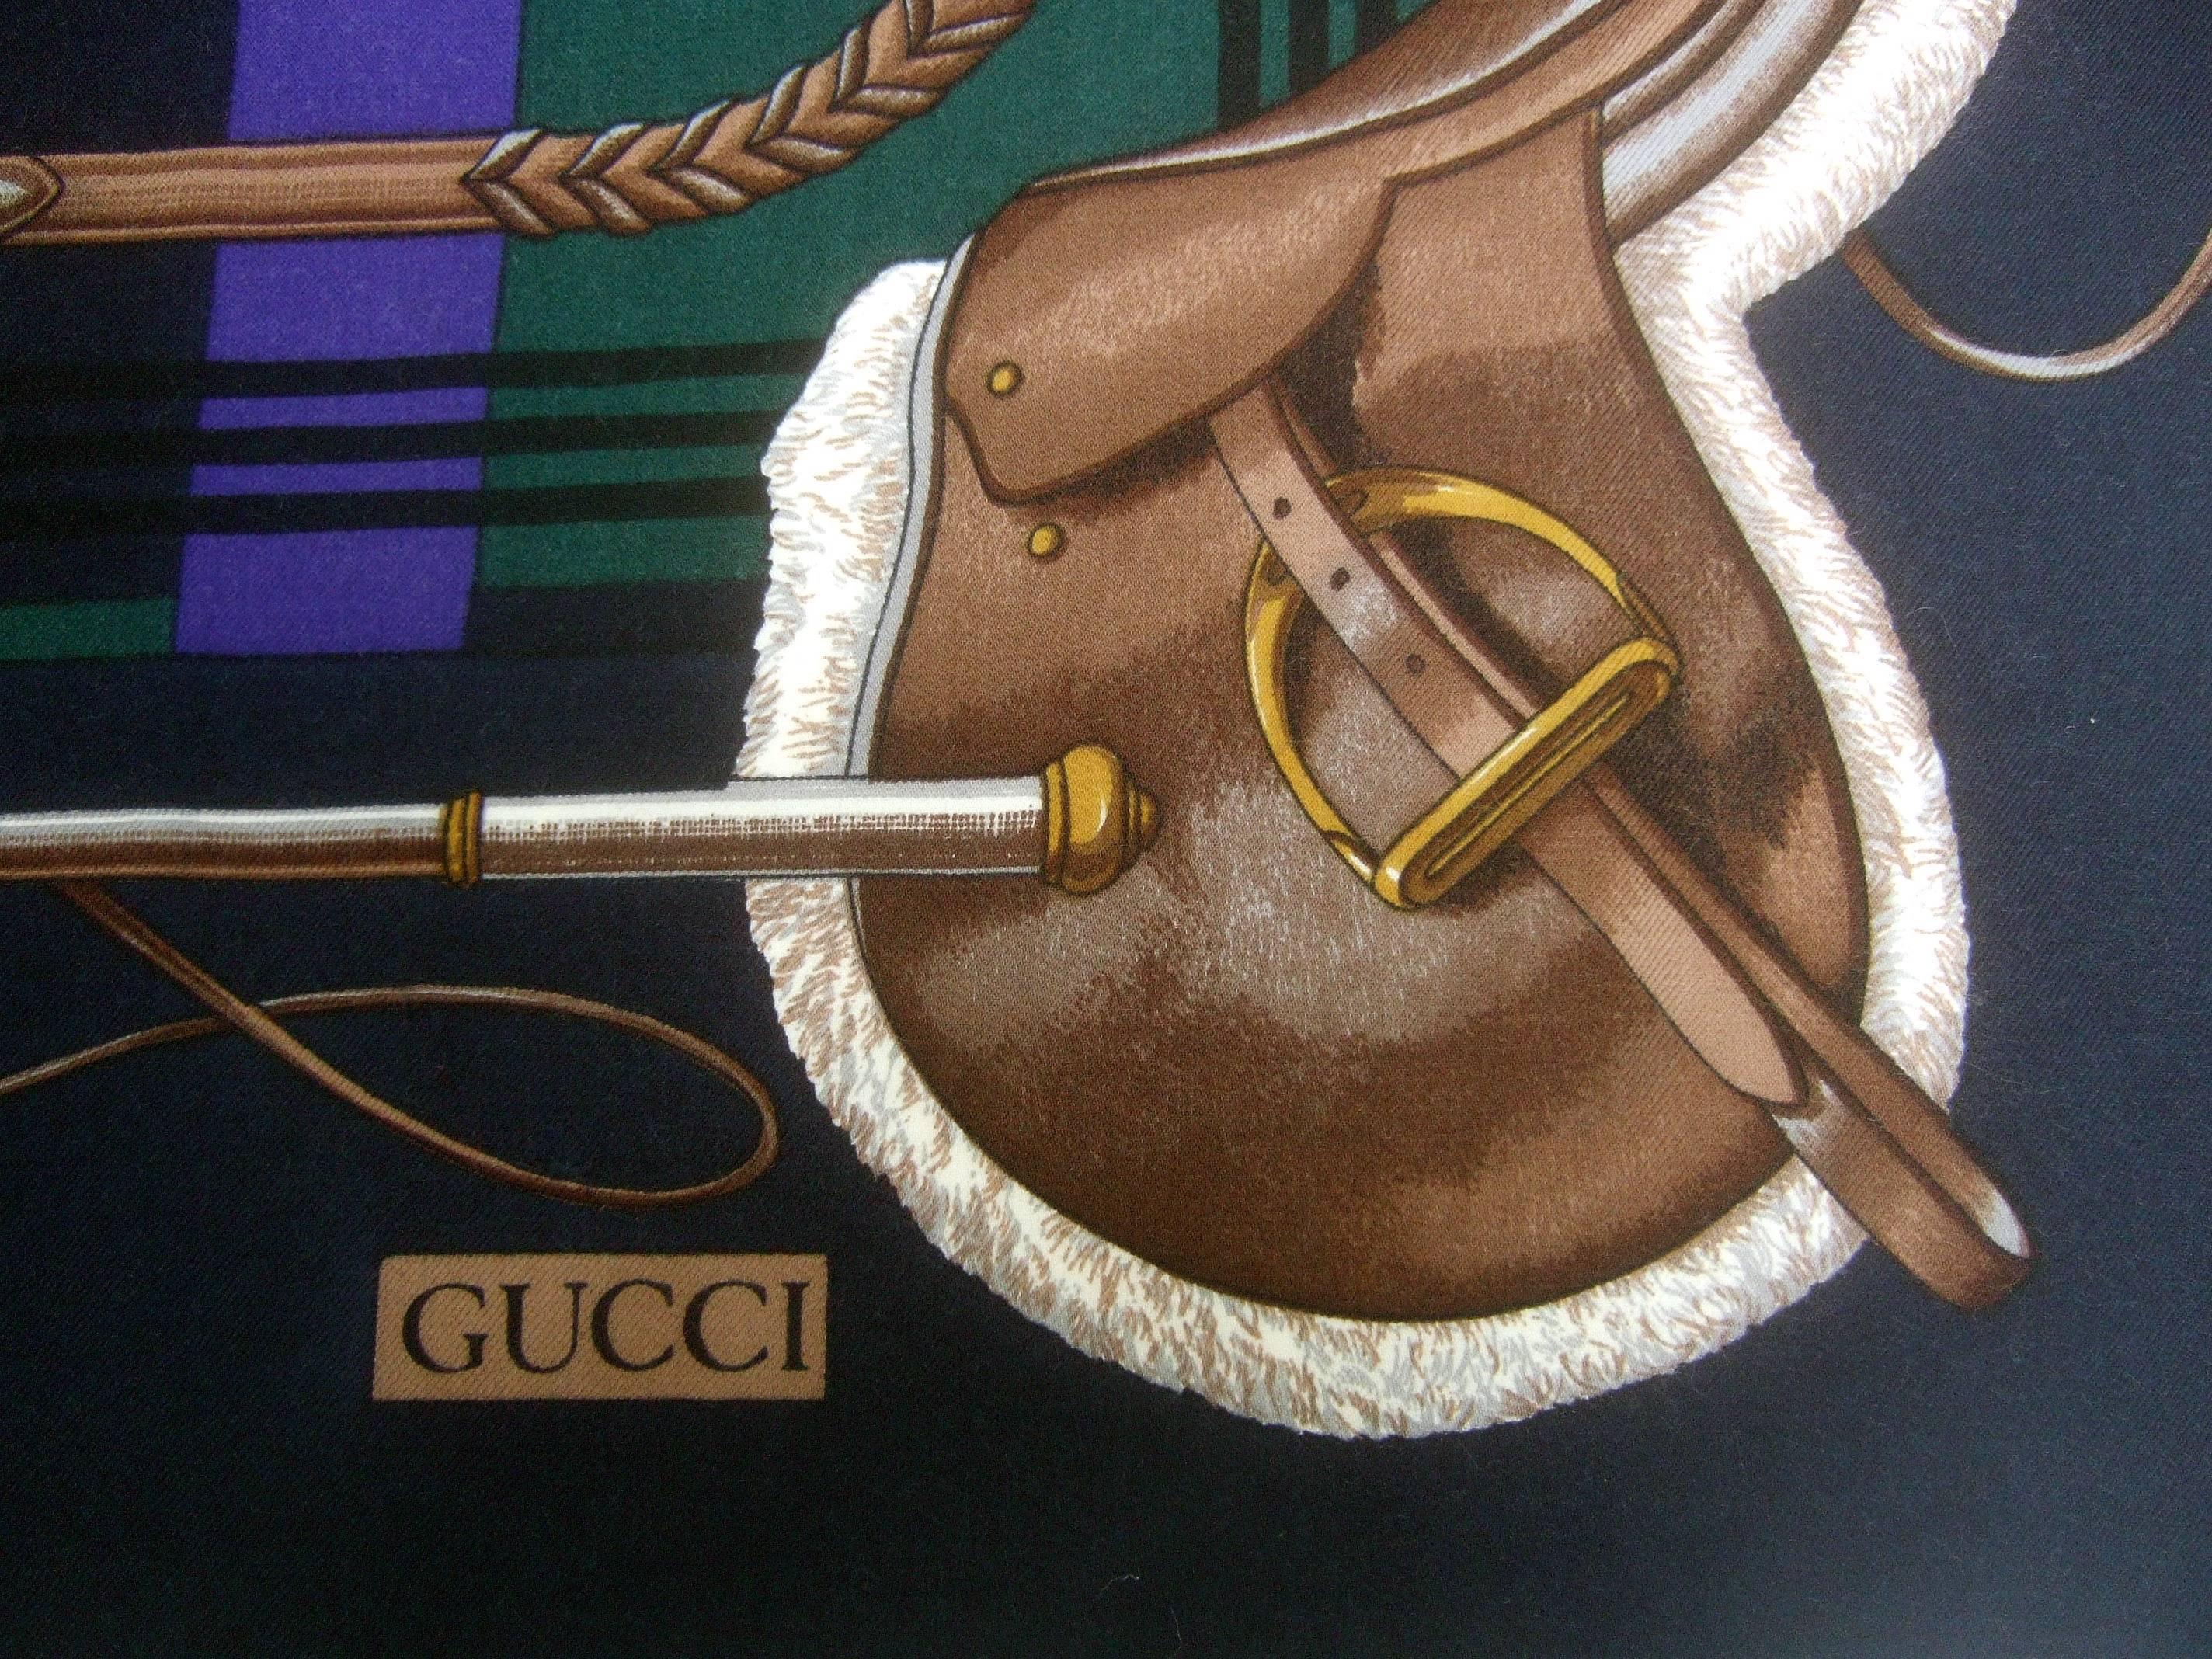 Gucci Italy Massive equestrian theme wool shawl - scarf measures 52 x 52 
The elegant Italian shawl - scarf is designed with color block
panels in eggplant purple and hunter green set against  
a black background 

Each of the four corners is